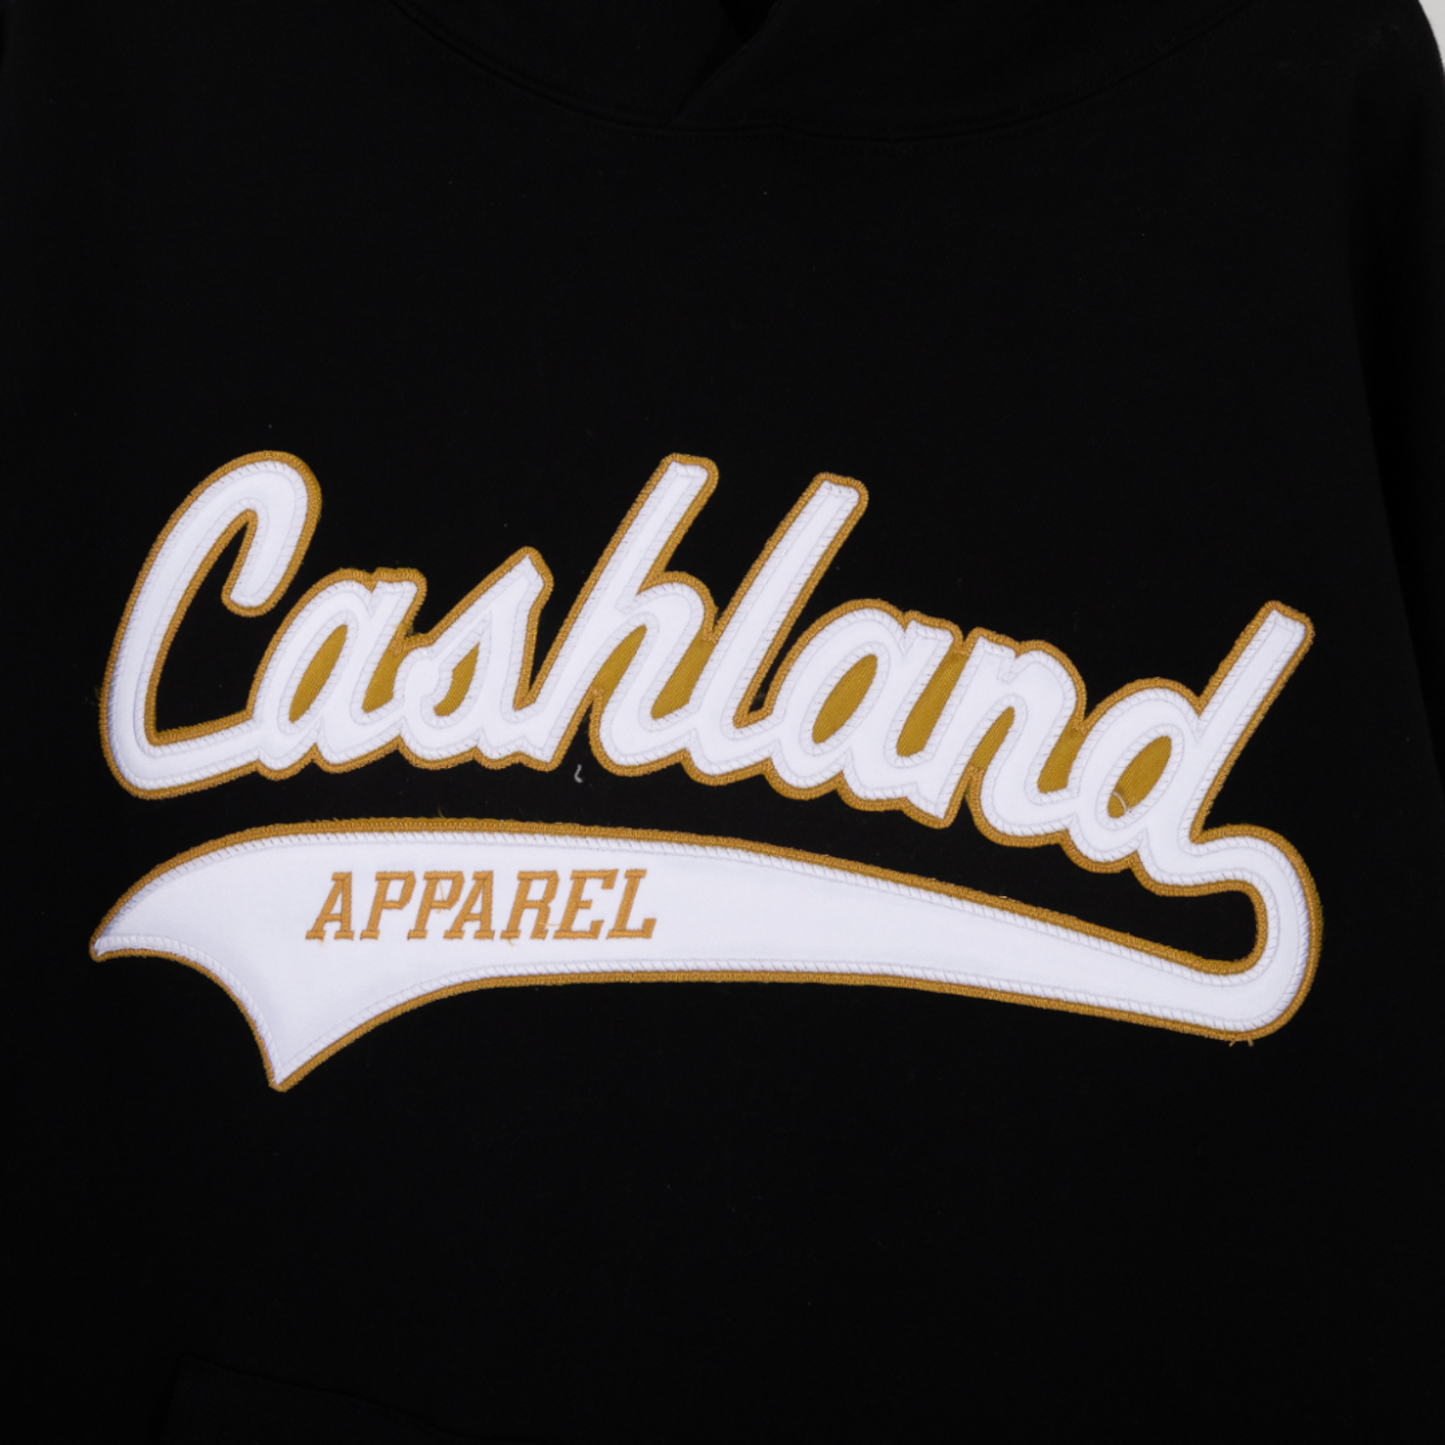 Pro-Script Pull Over Hooded Sweatshirt : BLACK with Gold and White